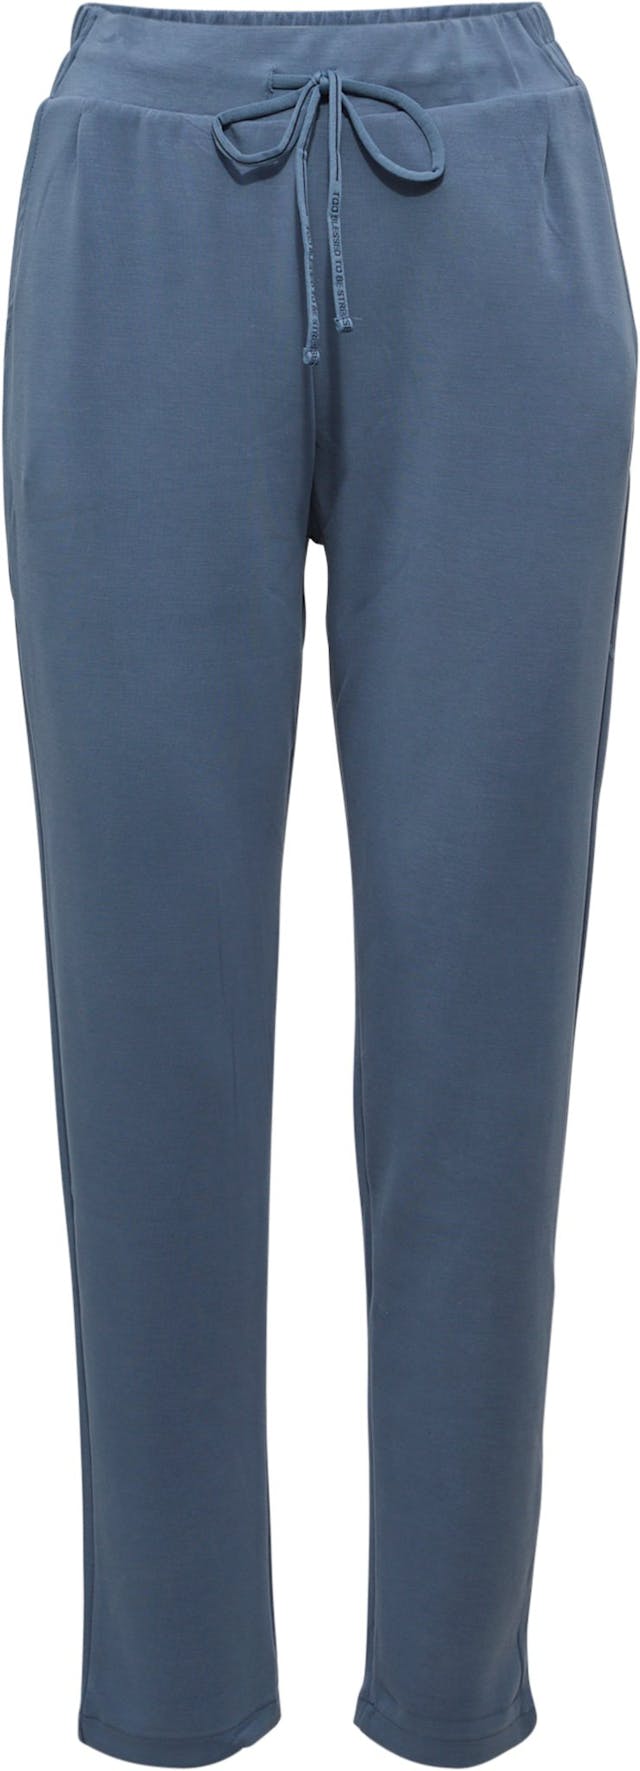 Product image for The Sunday Pant - Women's